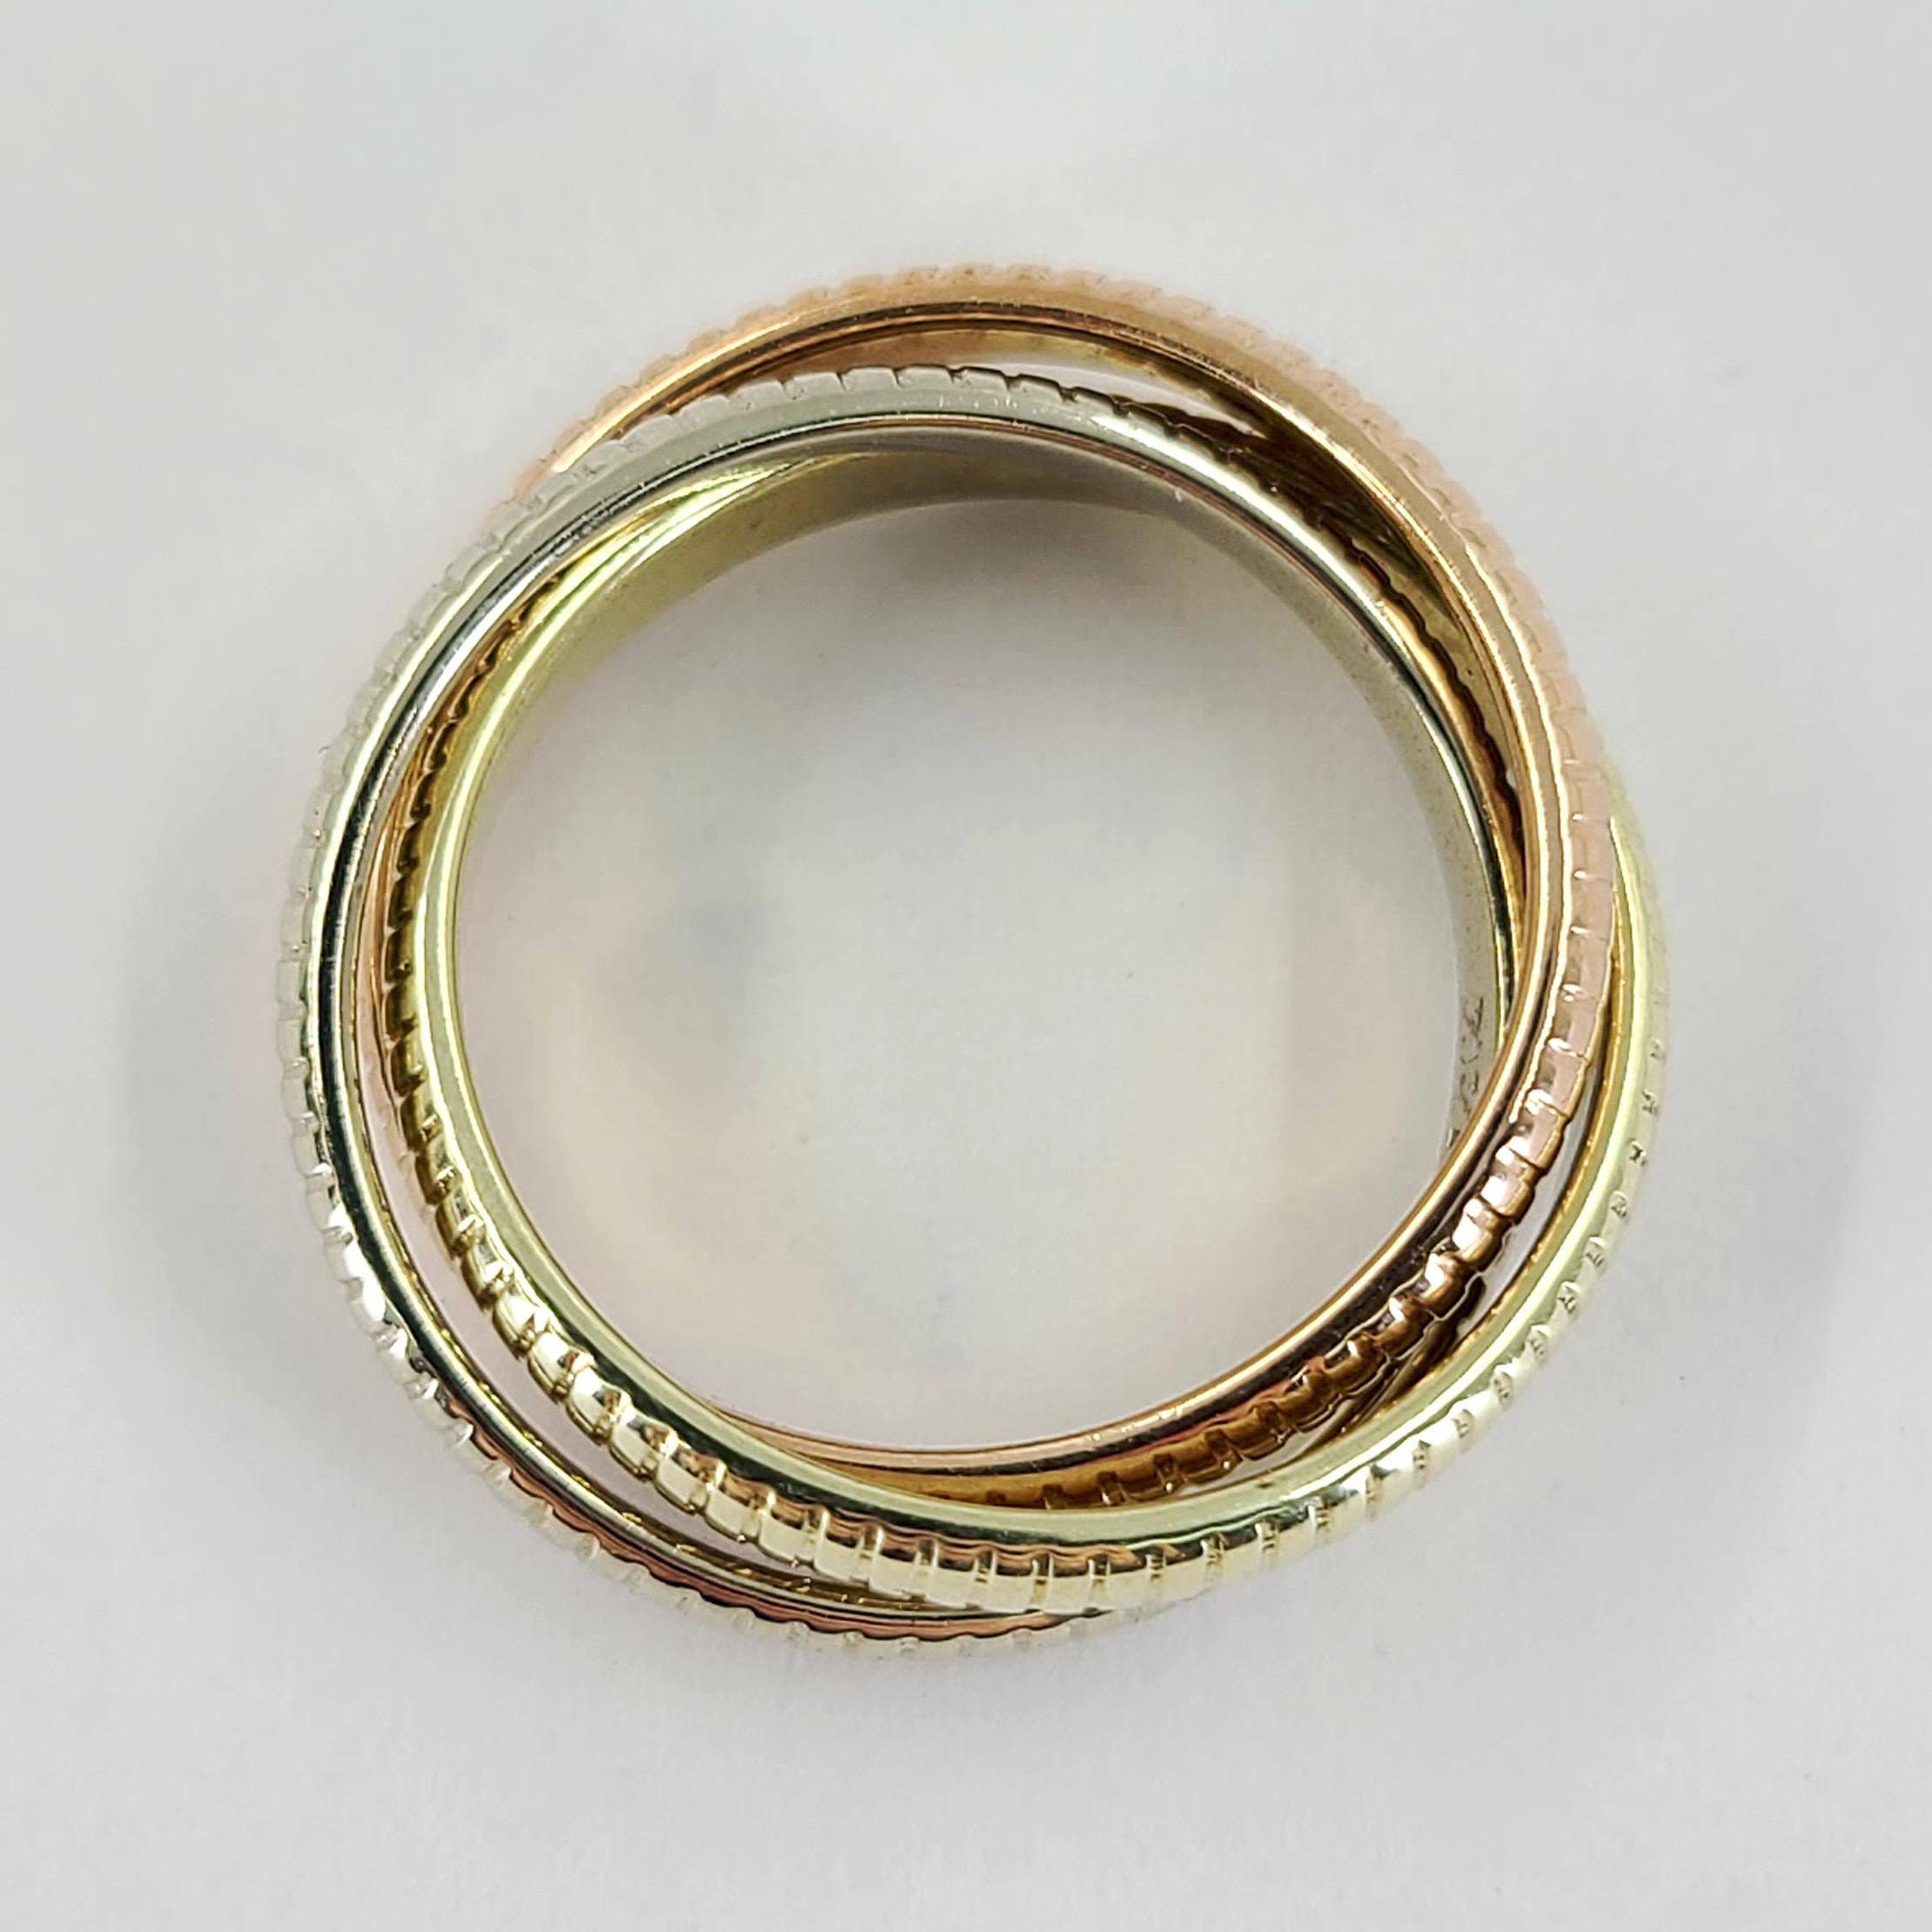 14 Karat Tricolor Gold Rolling Ring Featuring Ridged Texture In Rose, Yellow, & White Gold. Finger Size 3.5; Makes A Great Pinky Ring! Finished Weight Is 5.4 Grams. Cannot Be Sized.